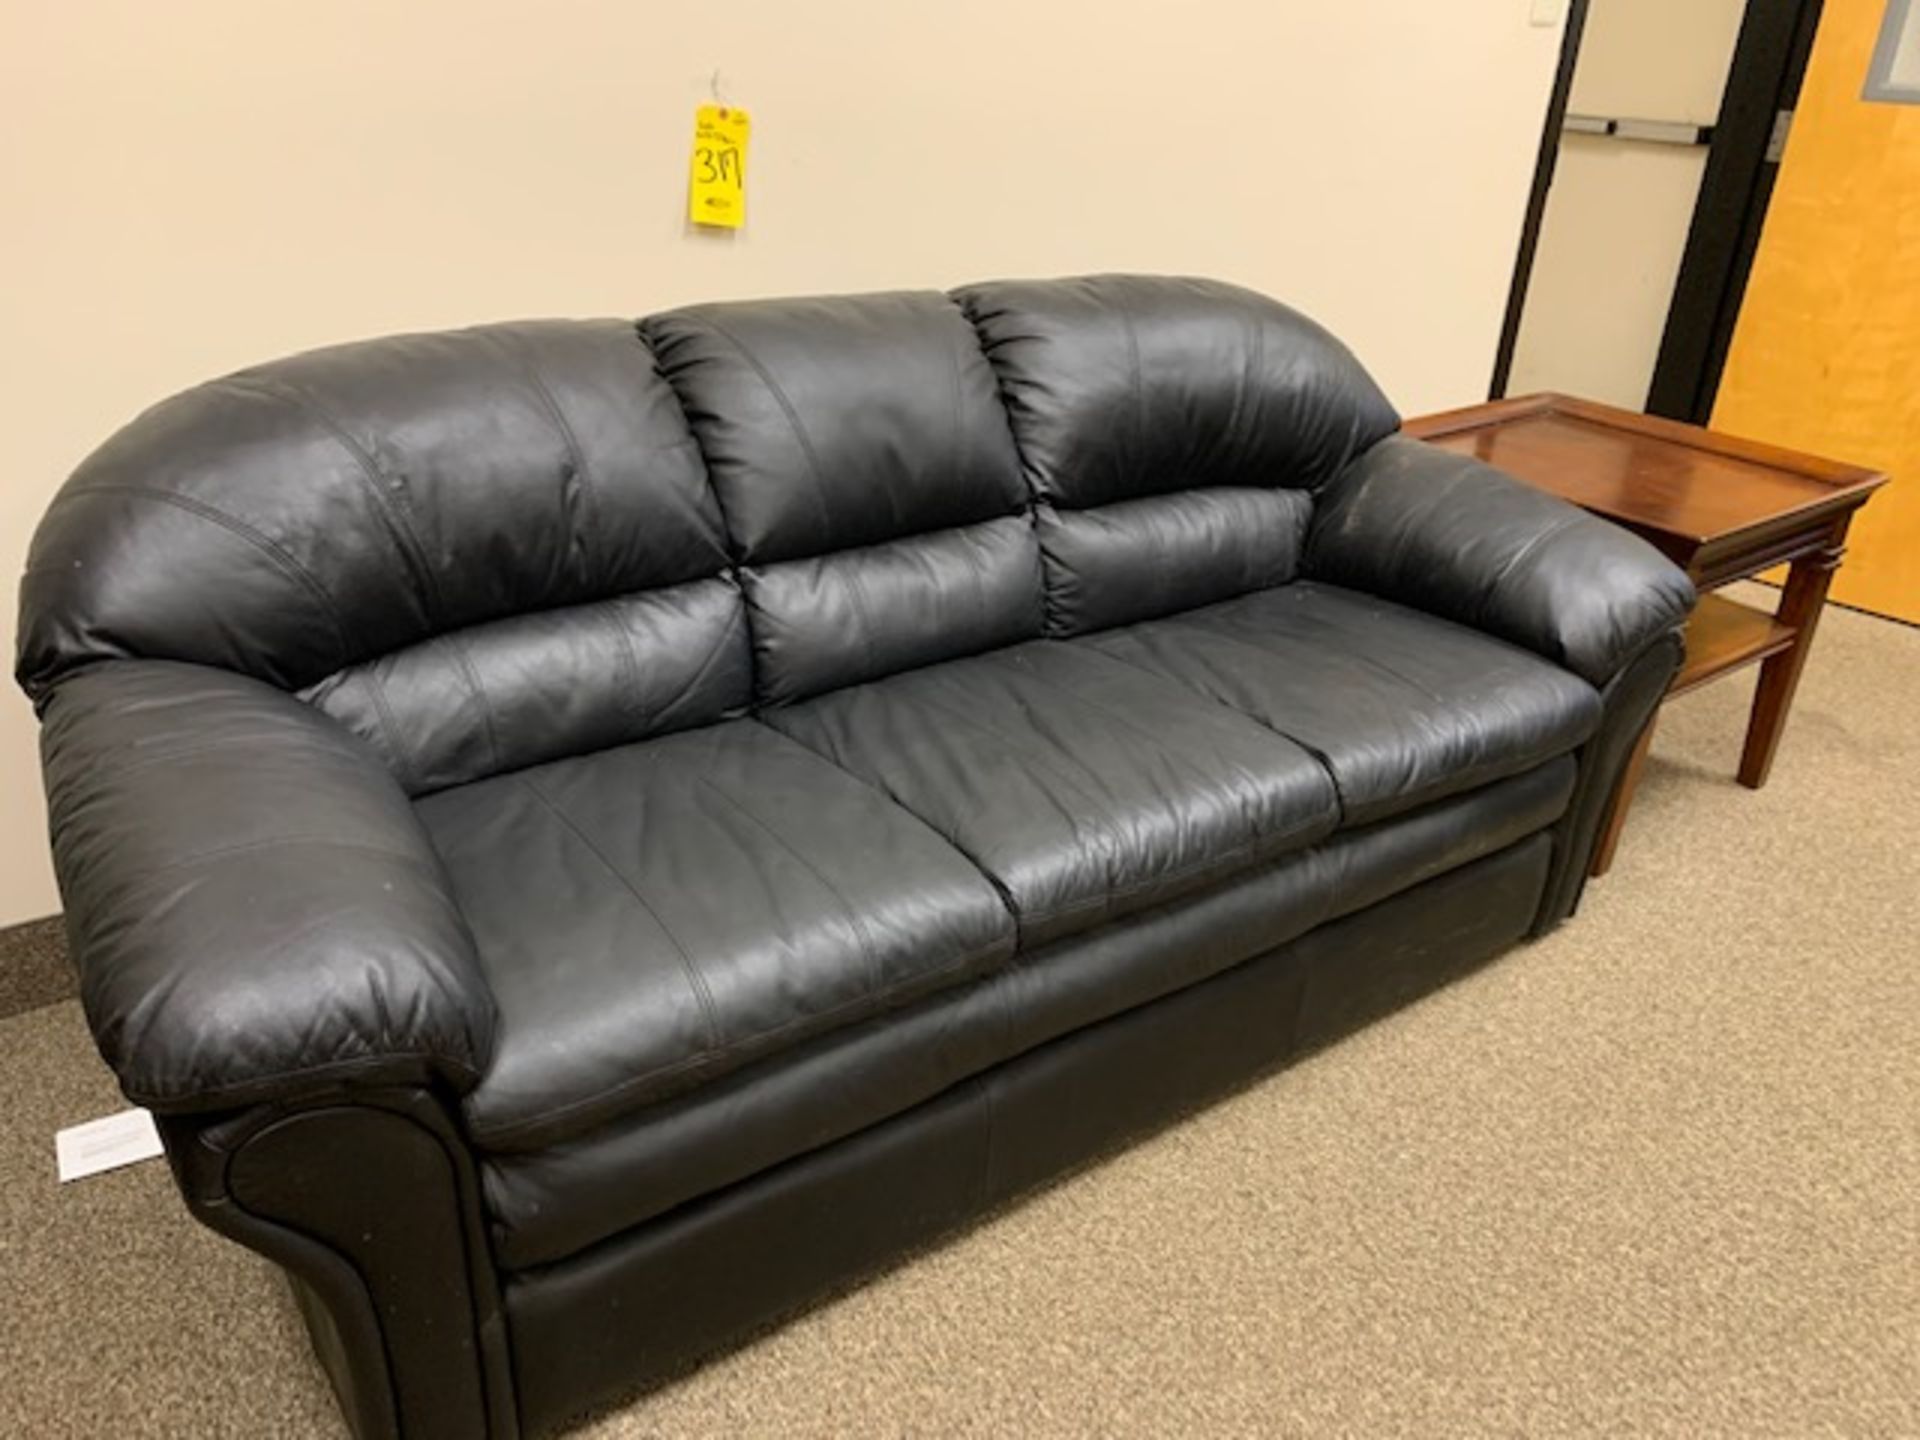 78 INCH BLACK TUFTED LEATHER LIKE SOFA AND END TABLE